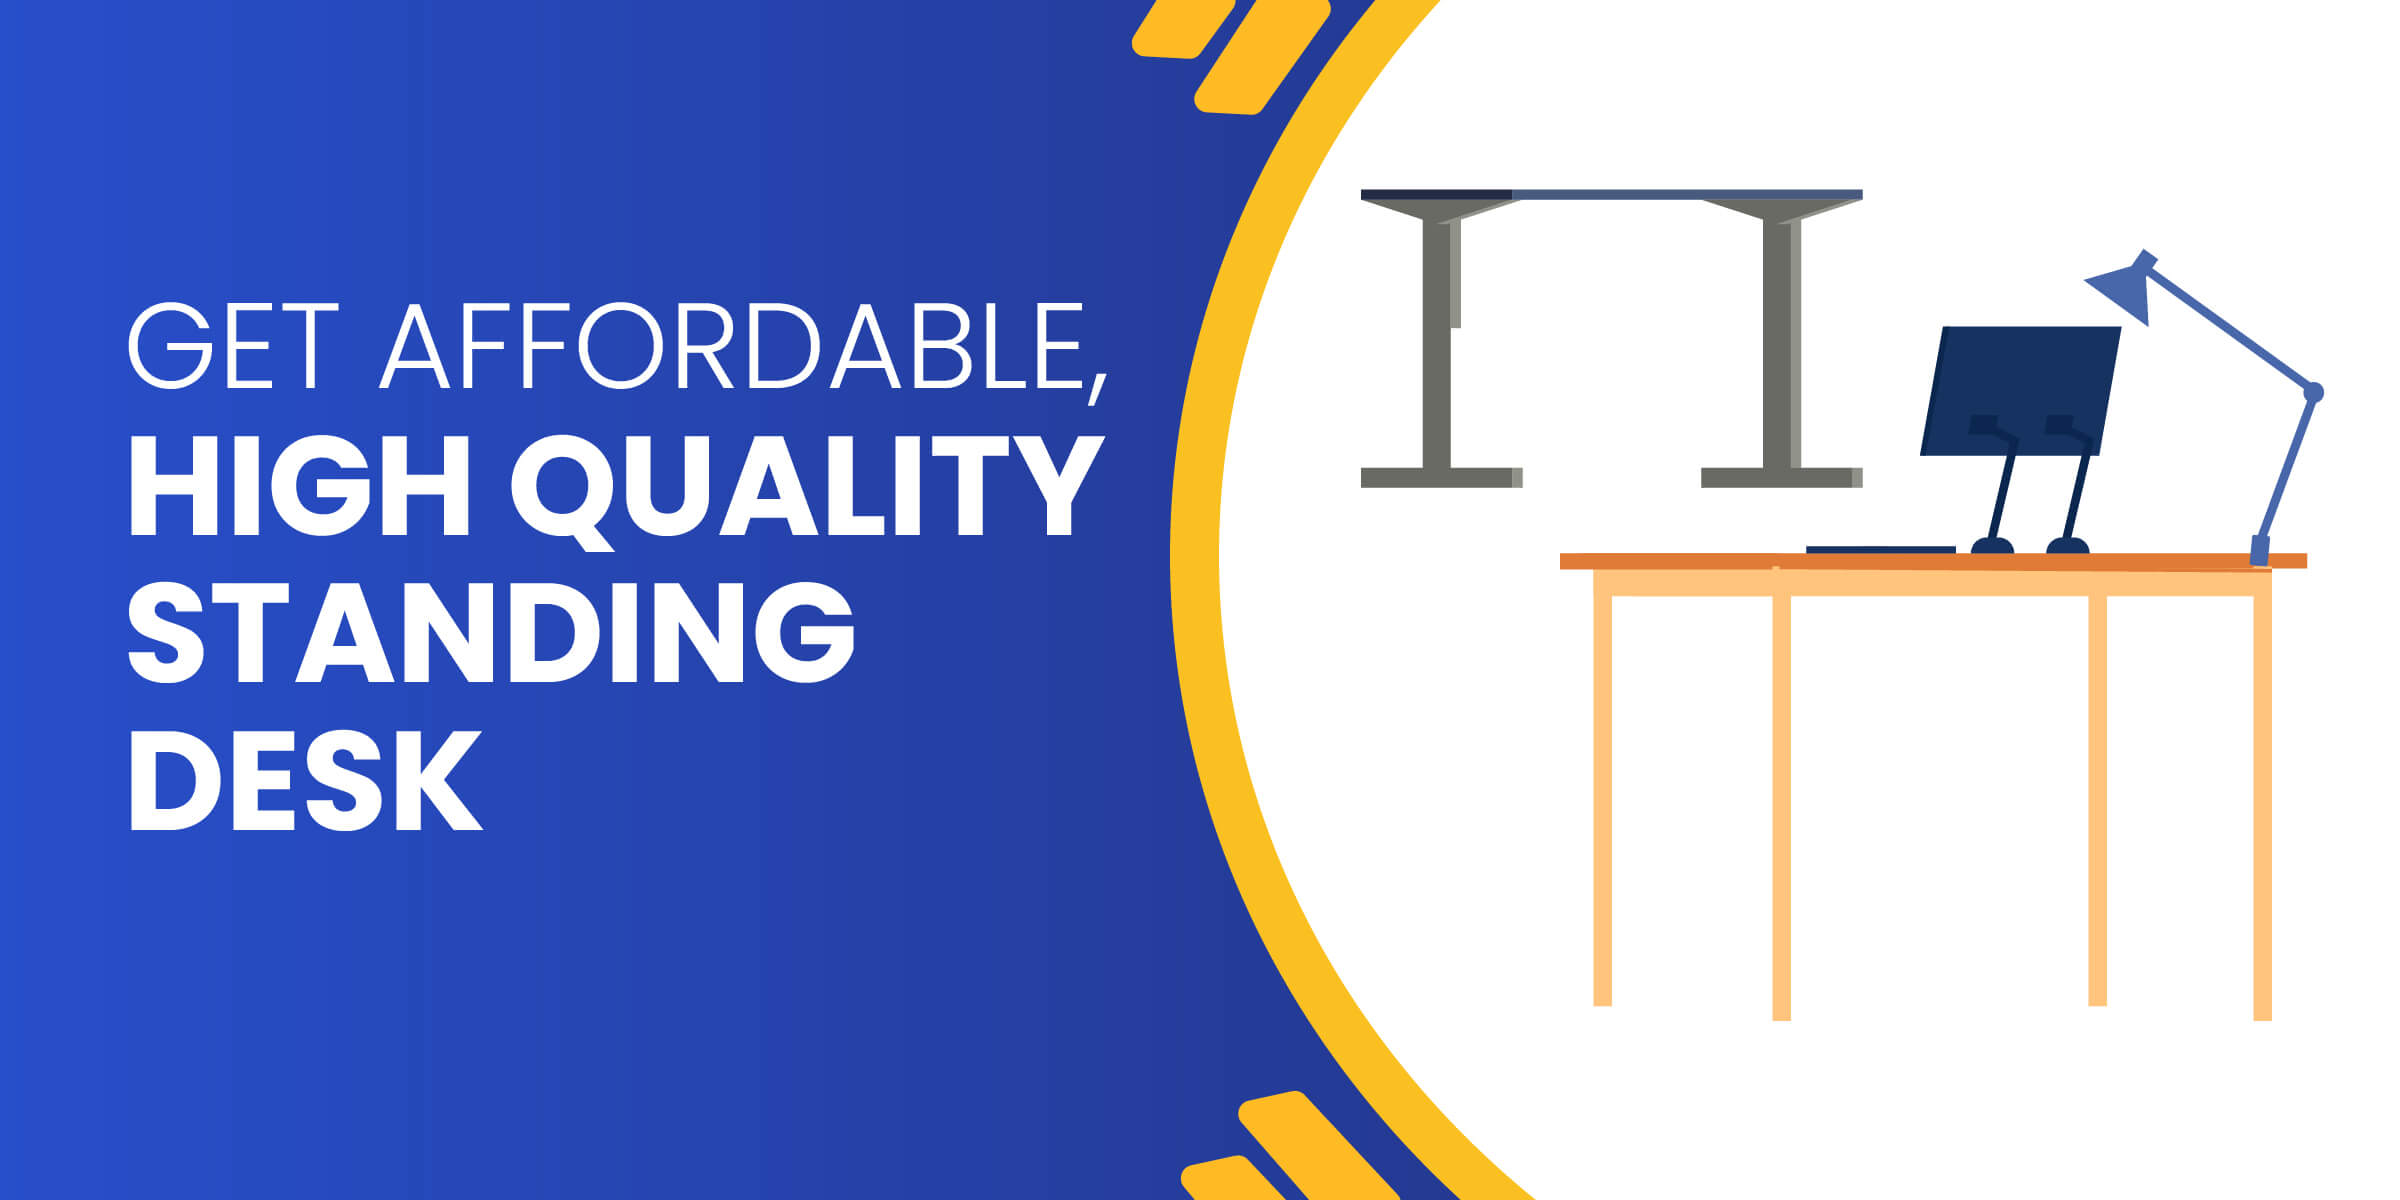 Get Affordable High Quality Standing Desk